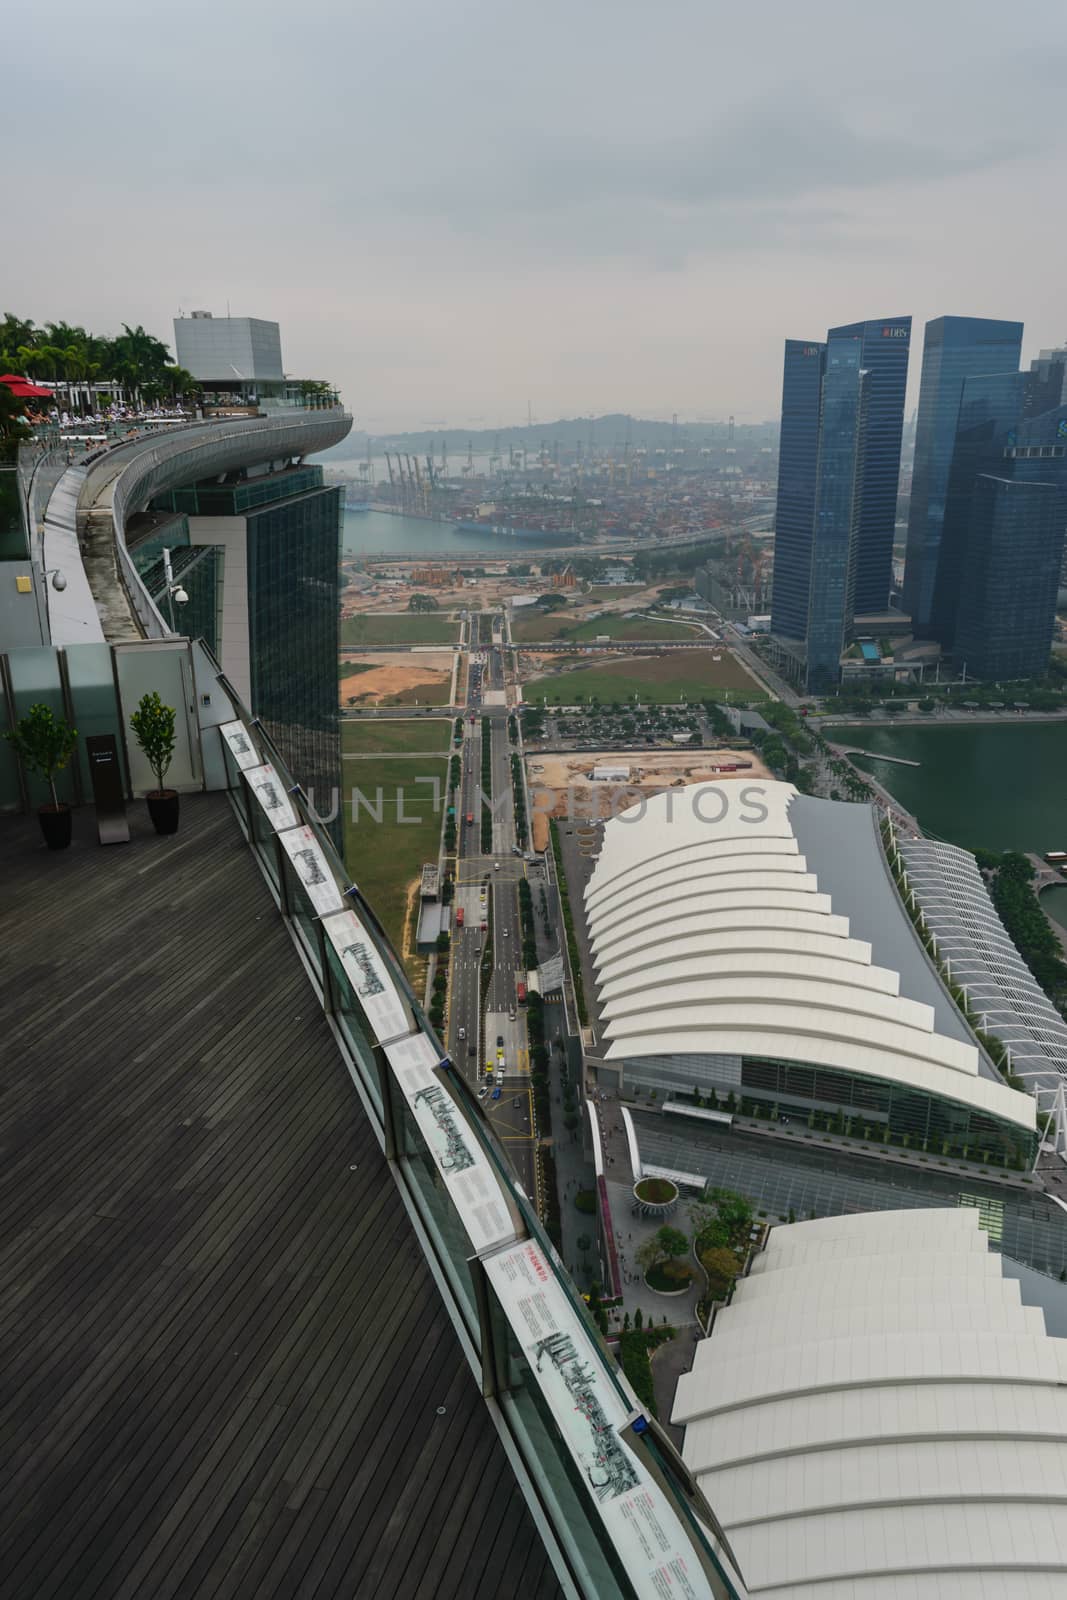 Singapore,Oct 18th,2014:View  central business buildings and landmarks of Singapore.